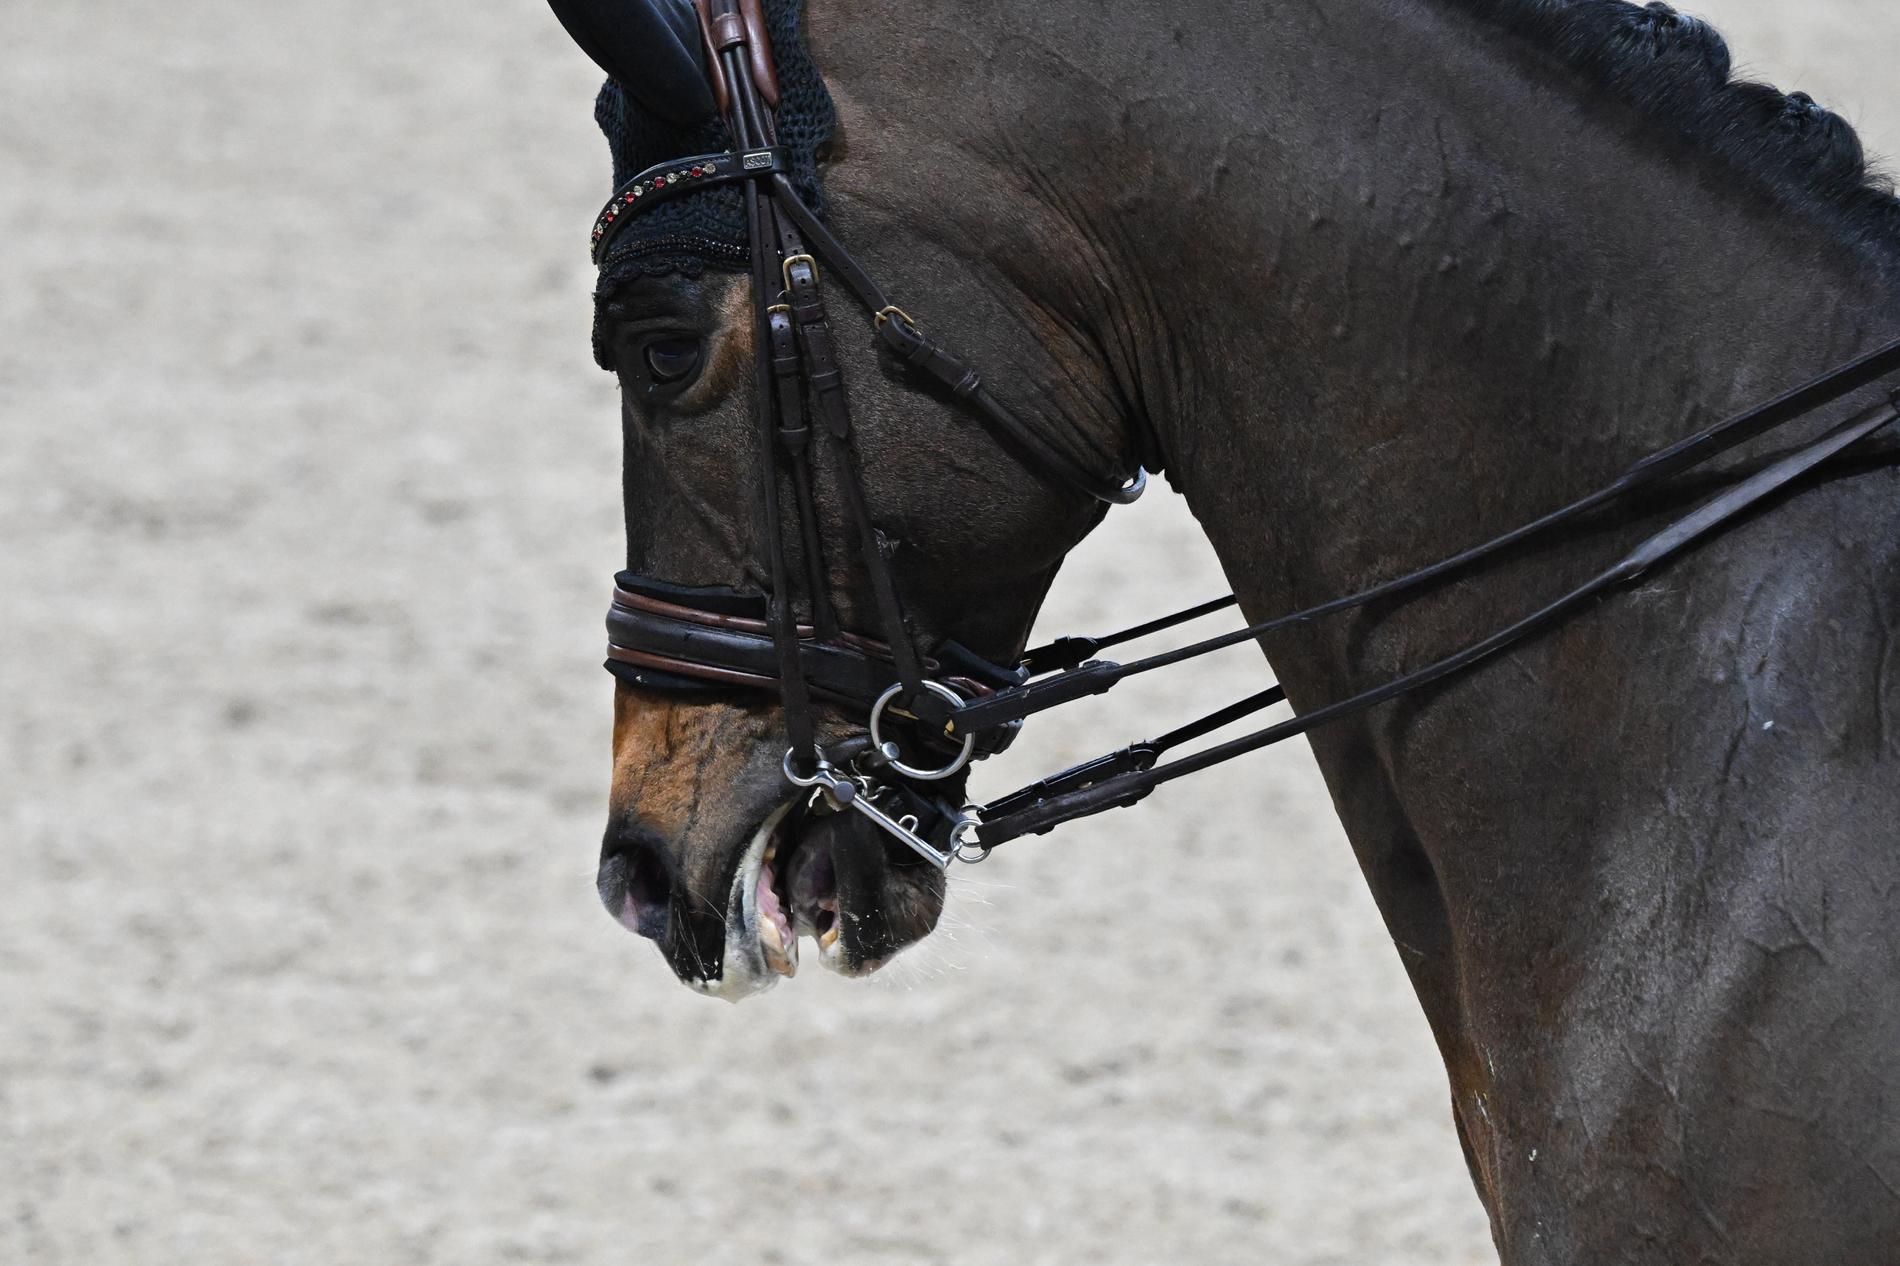 The rider Isabell Werths horse DSP Quantaz during the Freestyleprogram in Amsterdam.